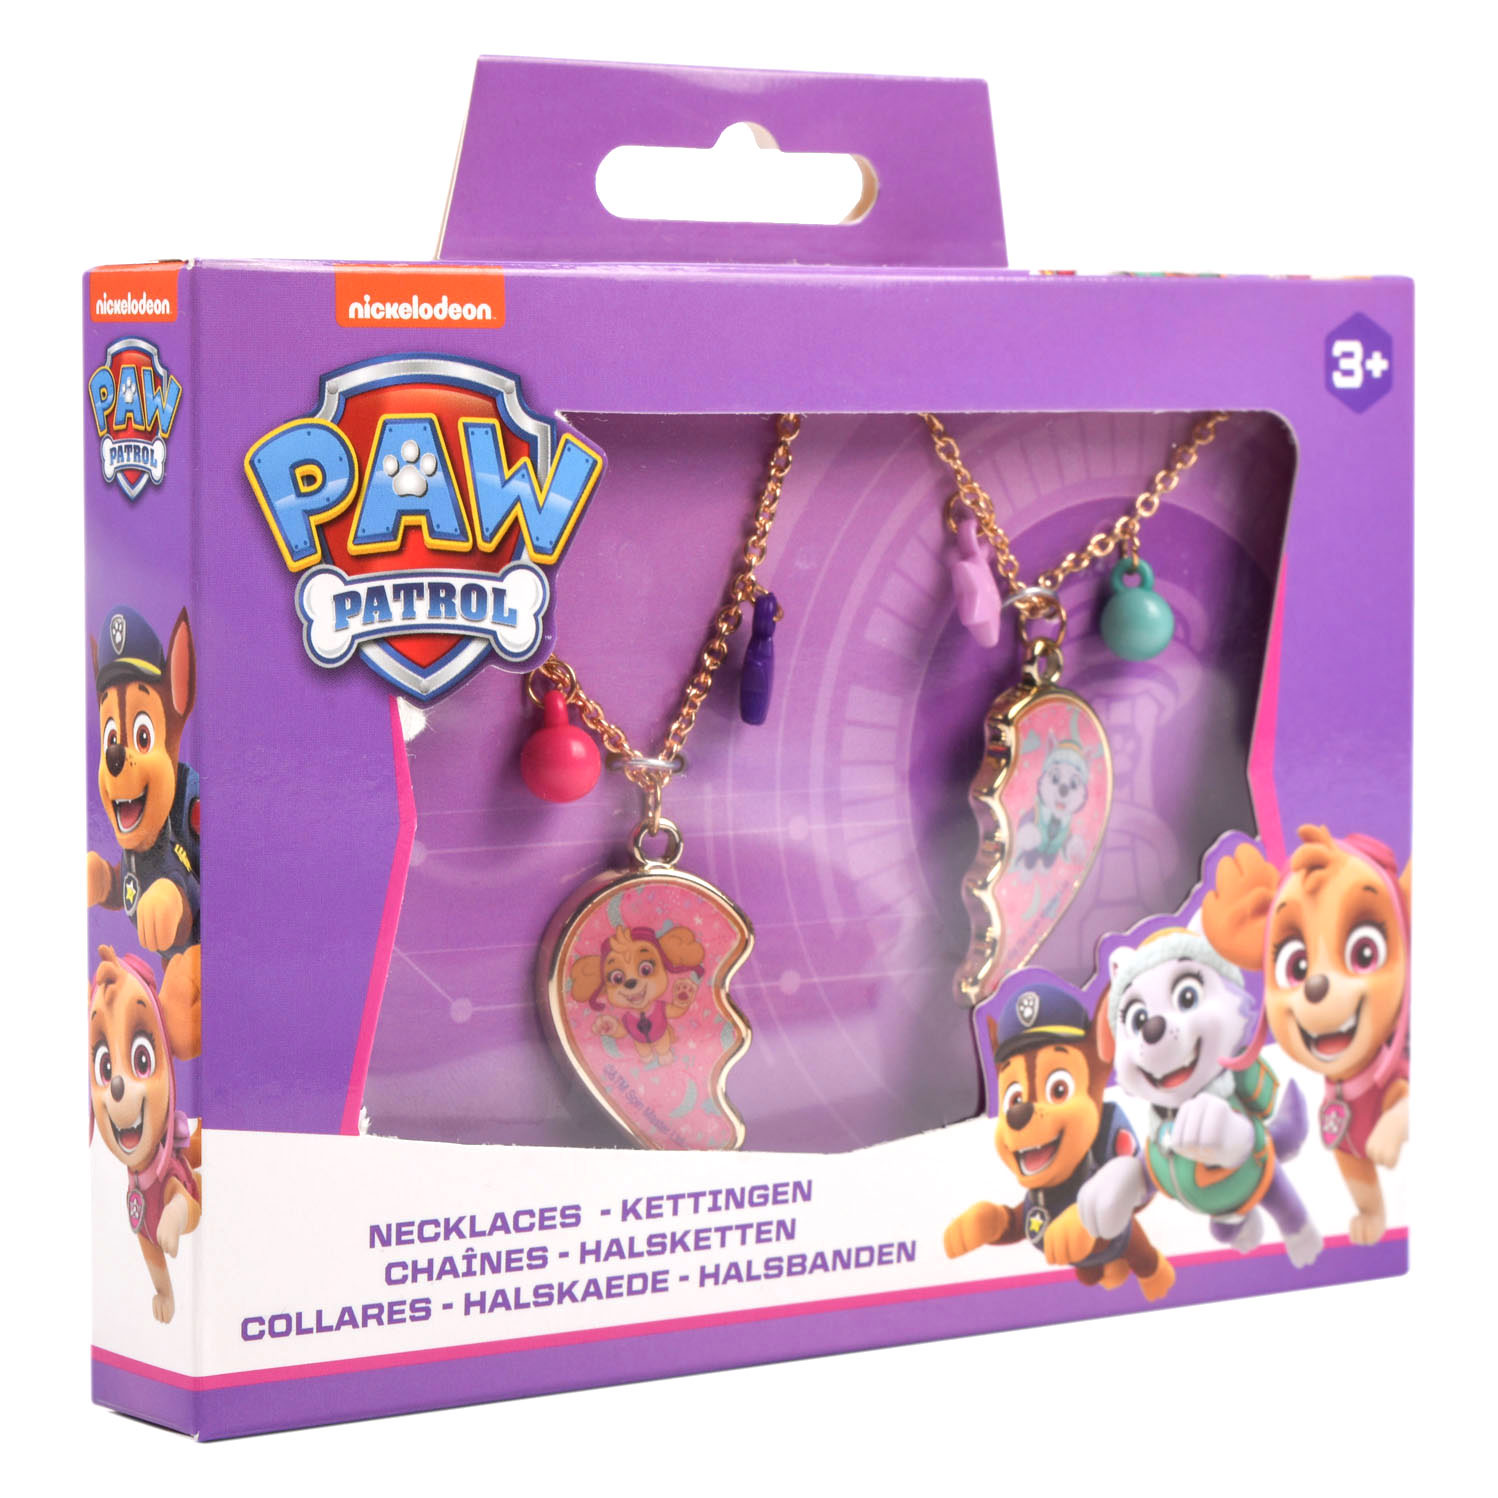 PAW PATROL RUBBLE PENDANT SILVER PLATED CHAIN 16 INCH GIFT BOX BIRTHDAY  TOYS | eBay